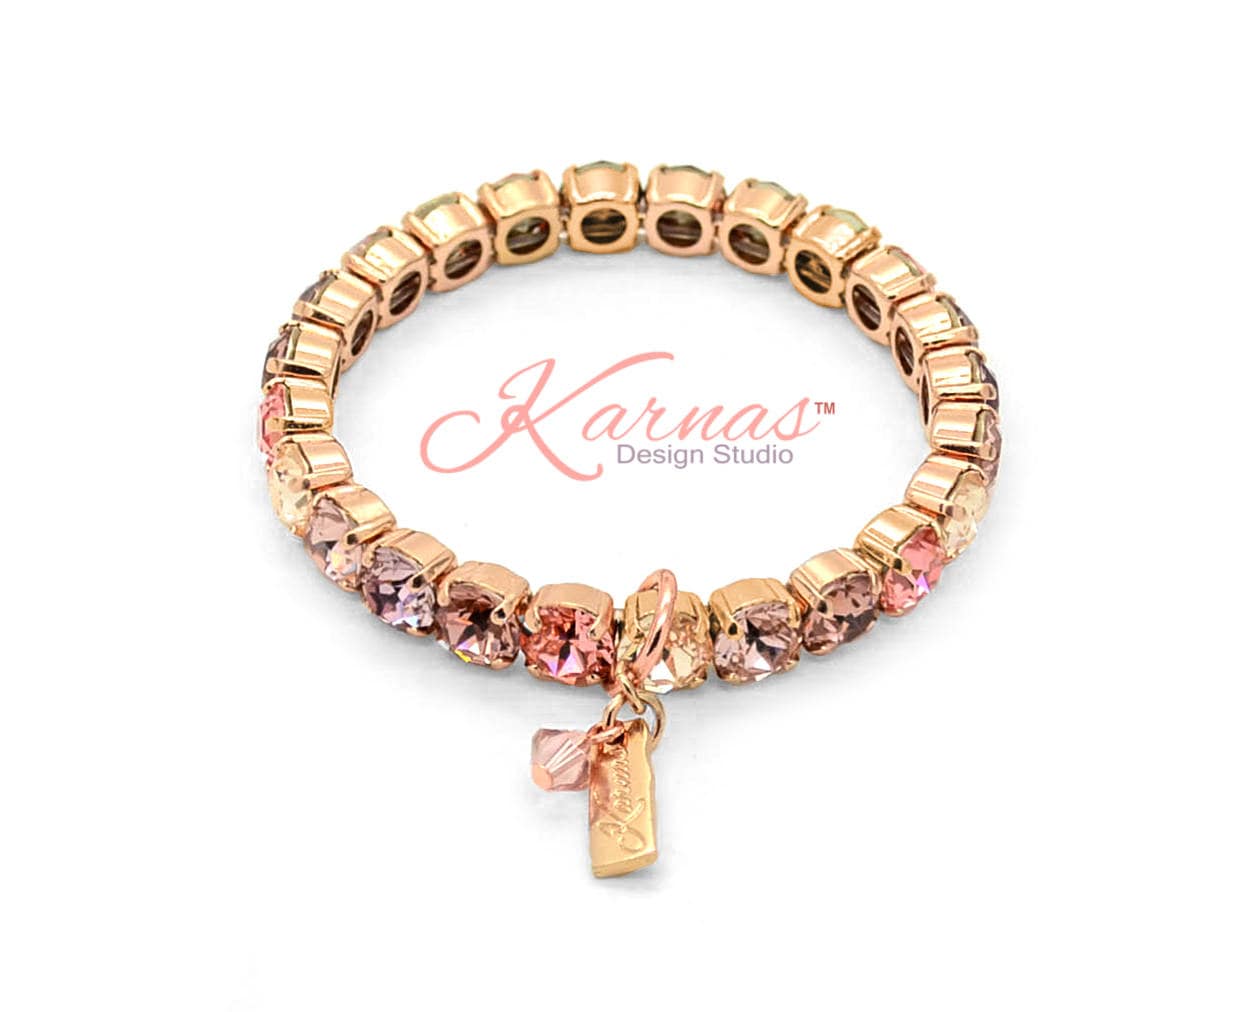 Peach Cobbler 8mm Stretch Bracelet Made With K.d.s. Premium Crystal Pick Your Finish Karnas Design Studio Free Shipping